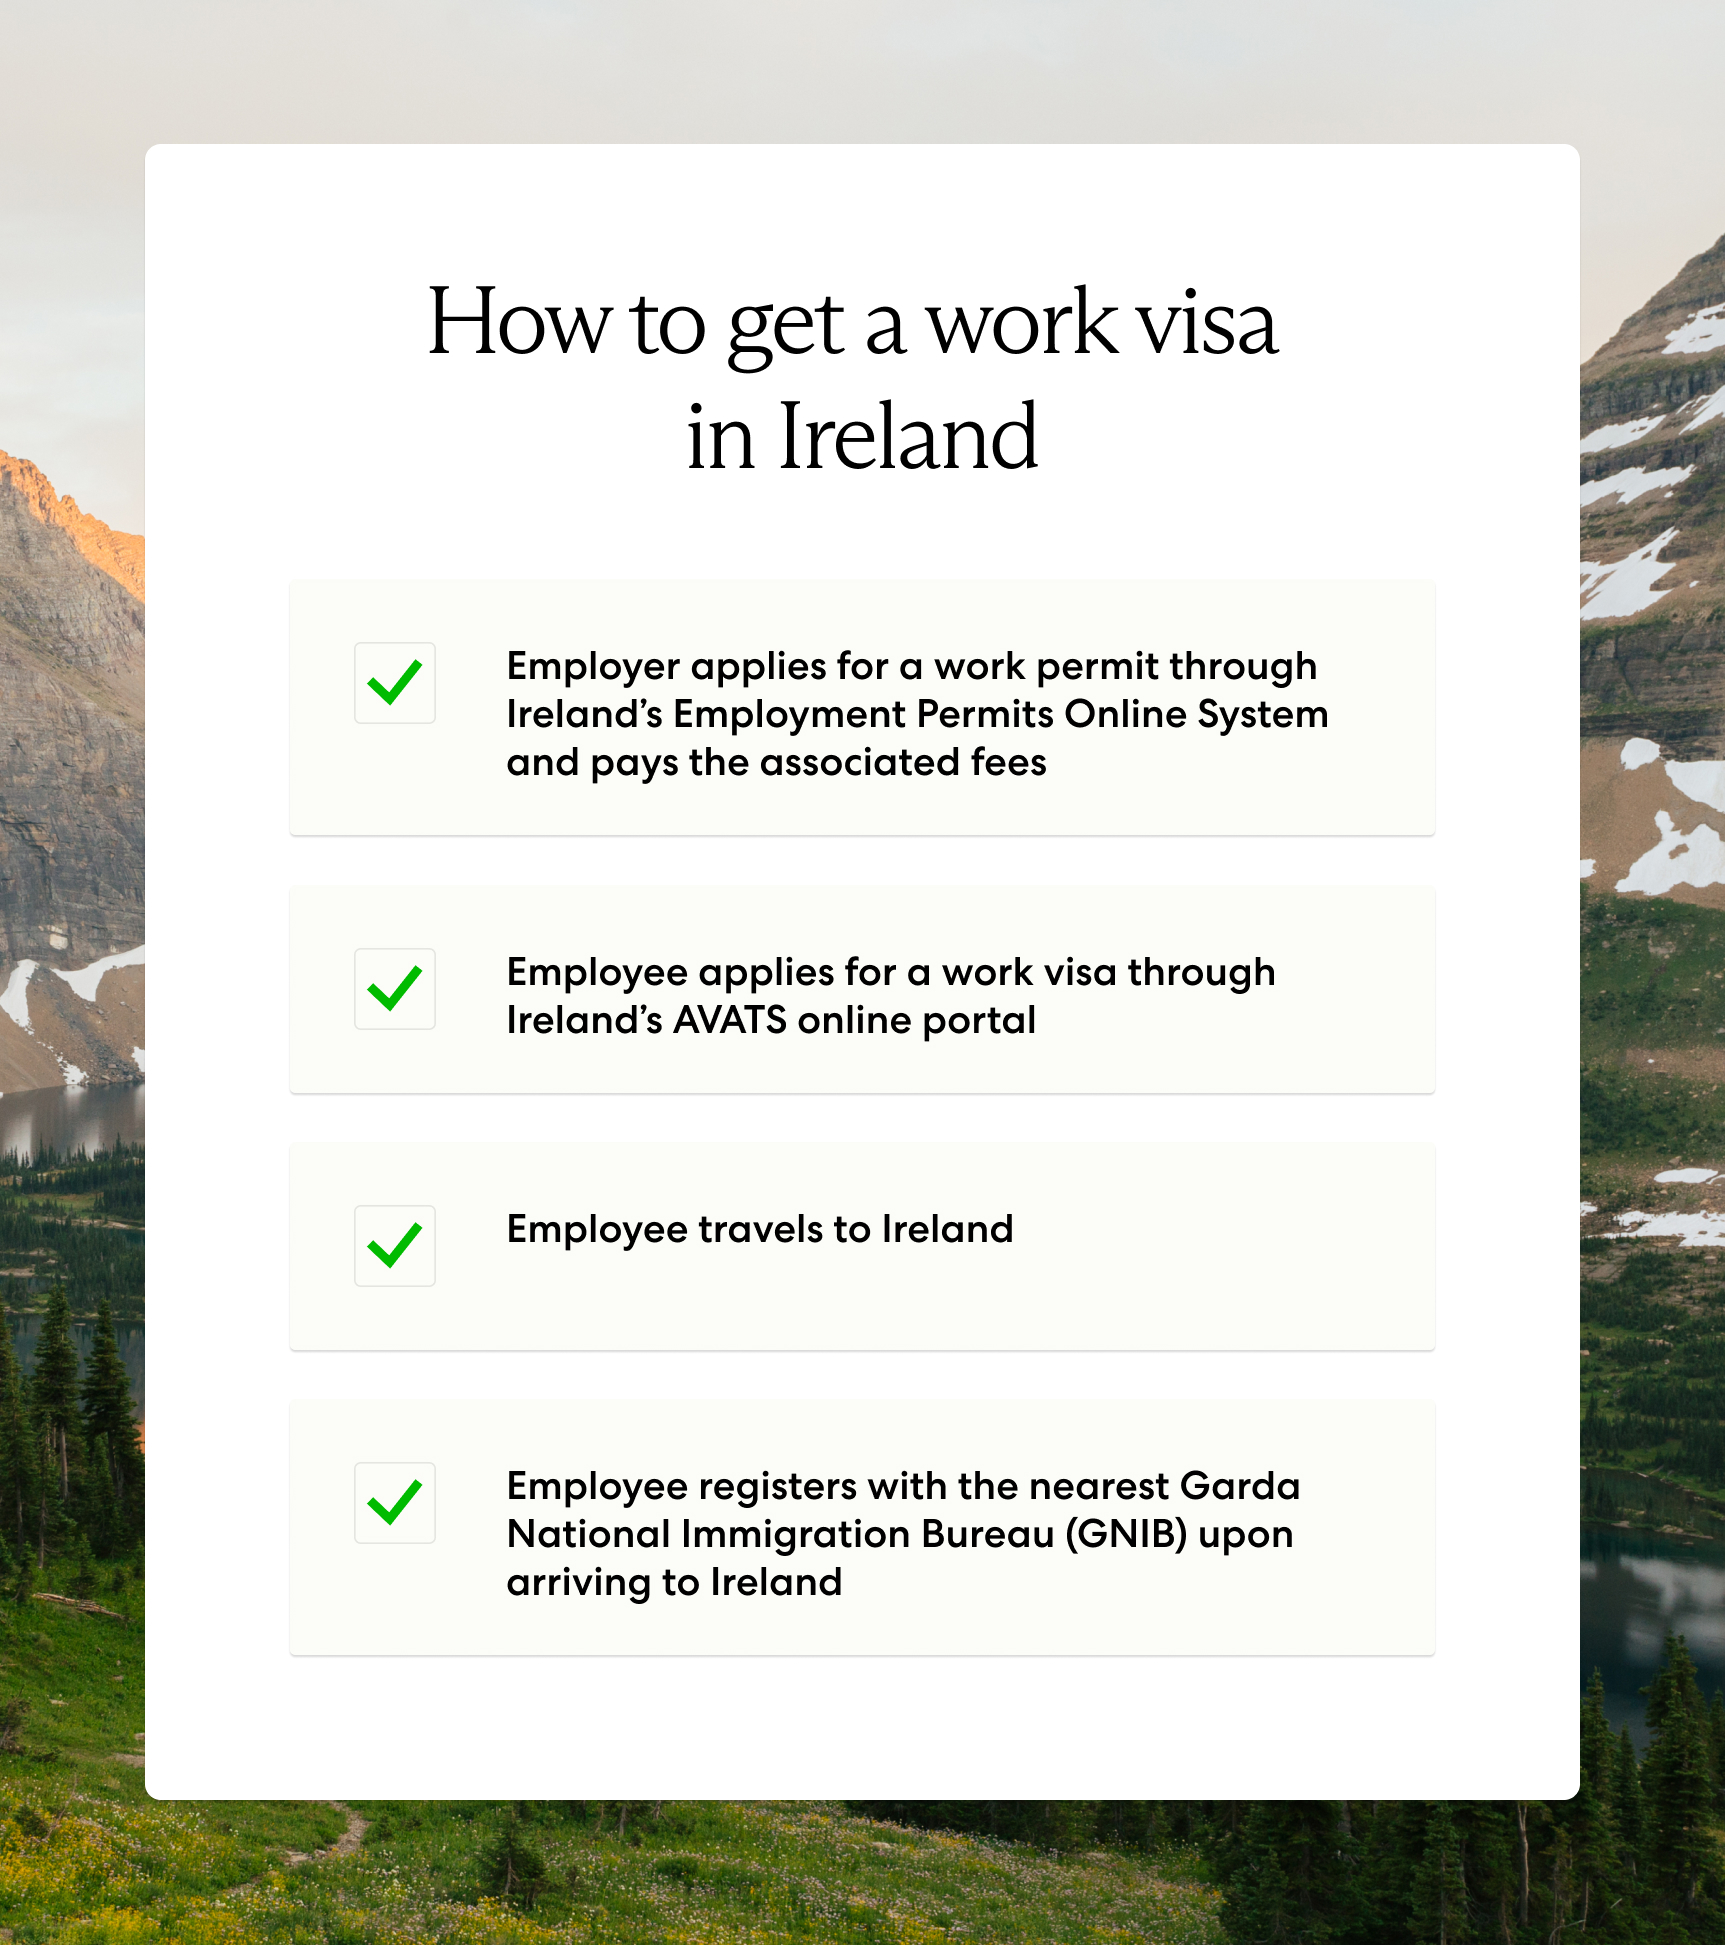 Steps for obtaining an Ireland work visa include applying for a work permit and travel visa and registering for a residence permit